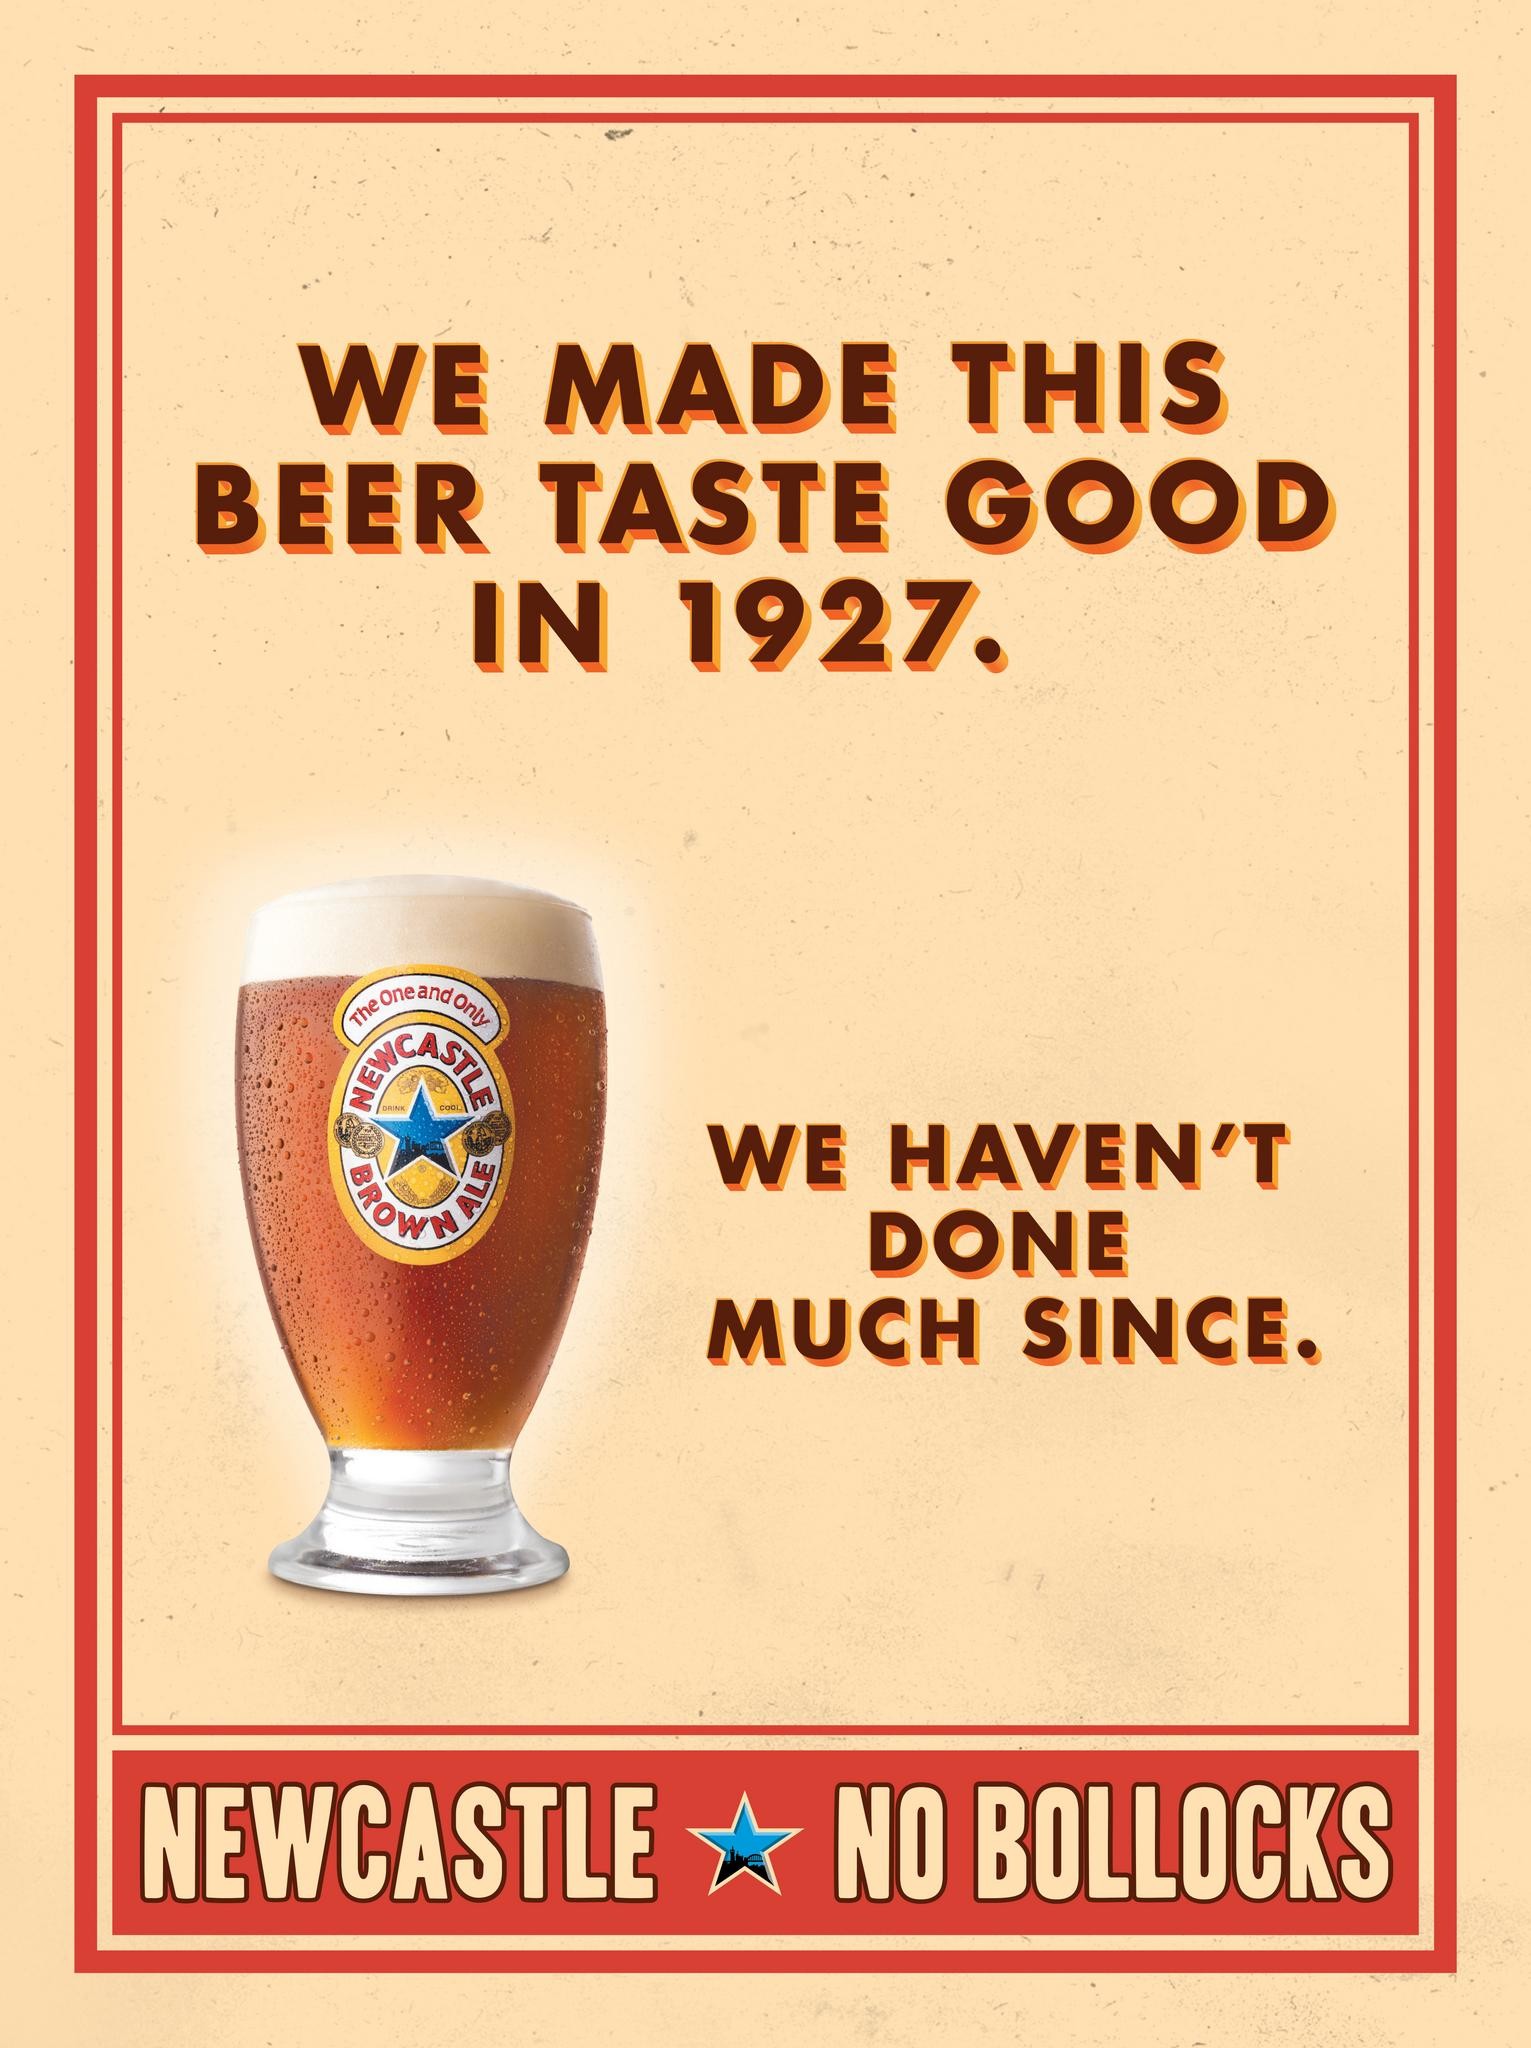 WE MADE THIS BEER TASTE GOOD IN 1927. WE HAVEN'T DONE MUCH SINCE.